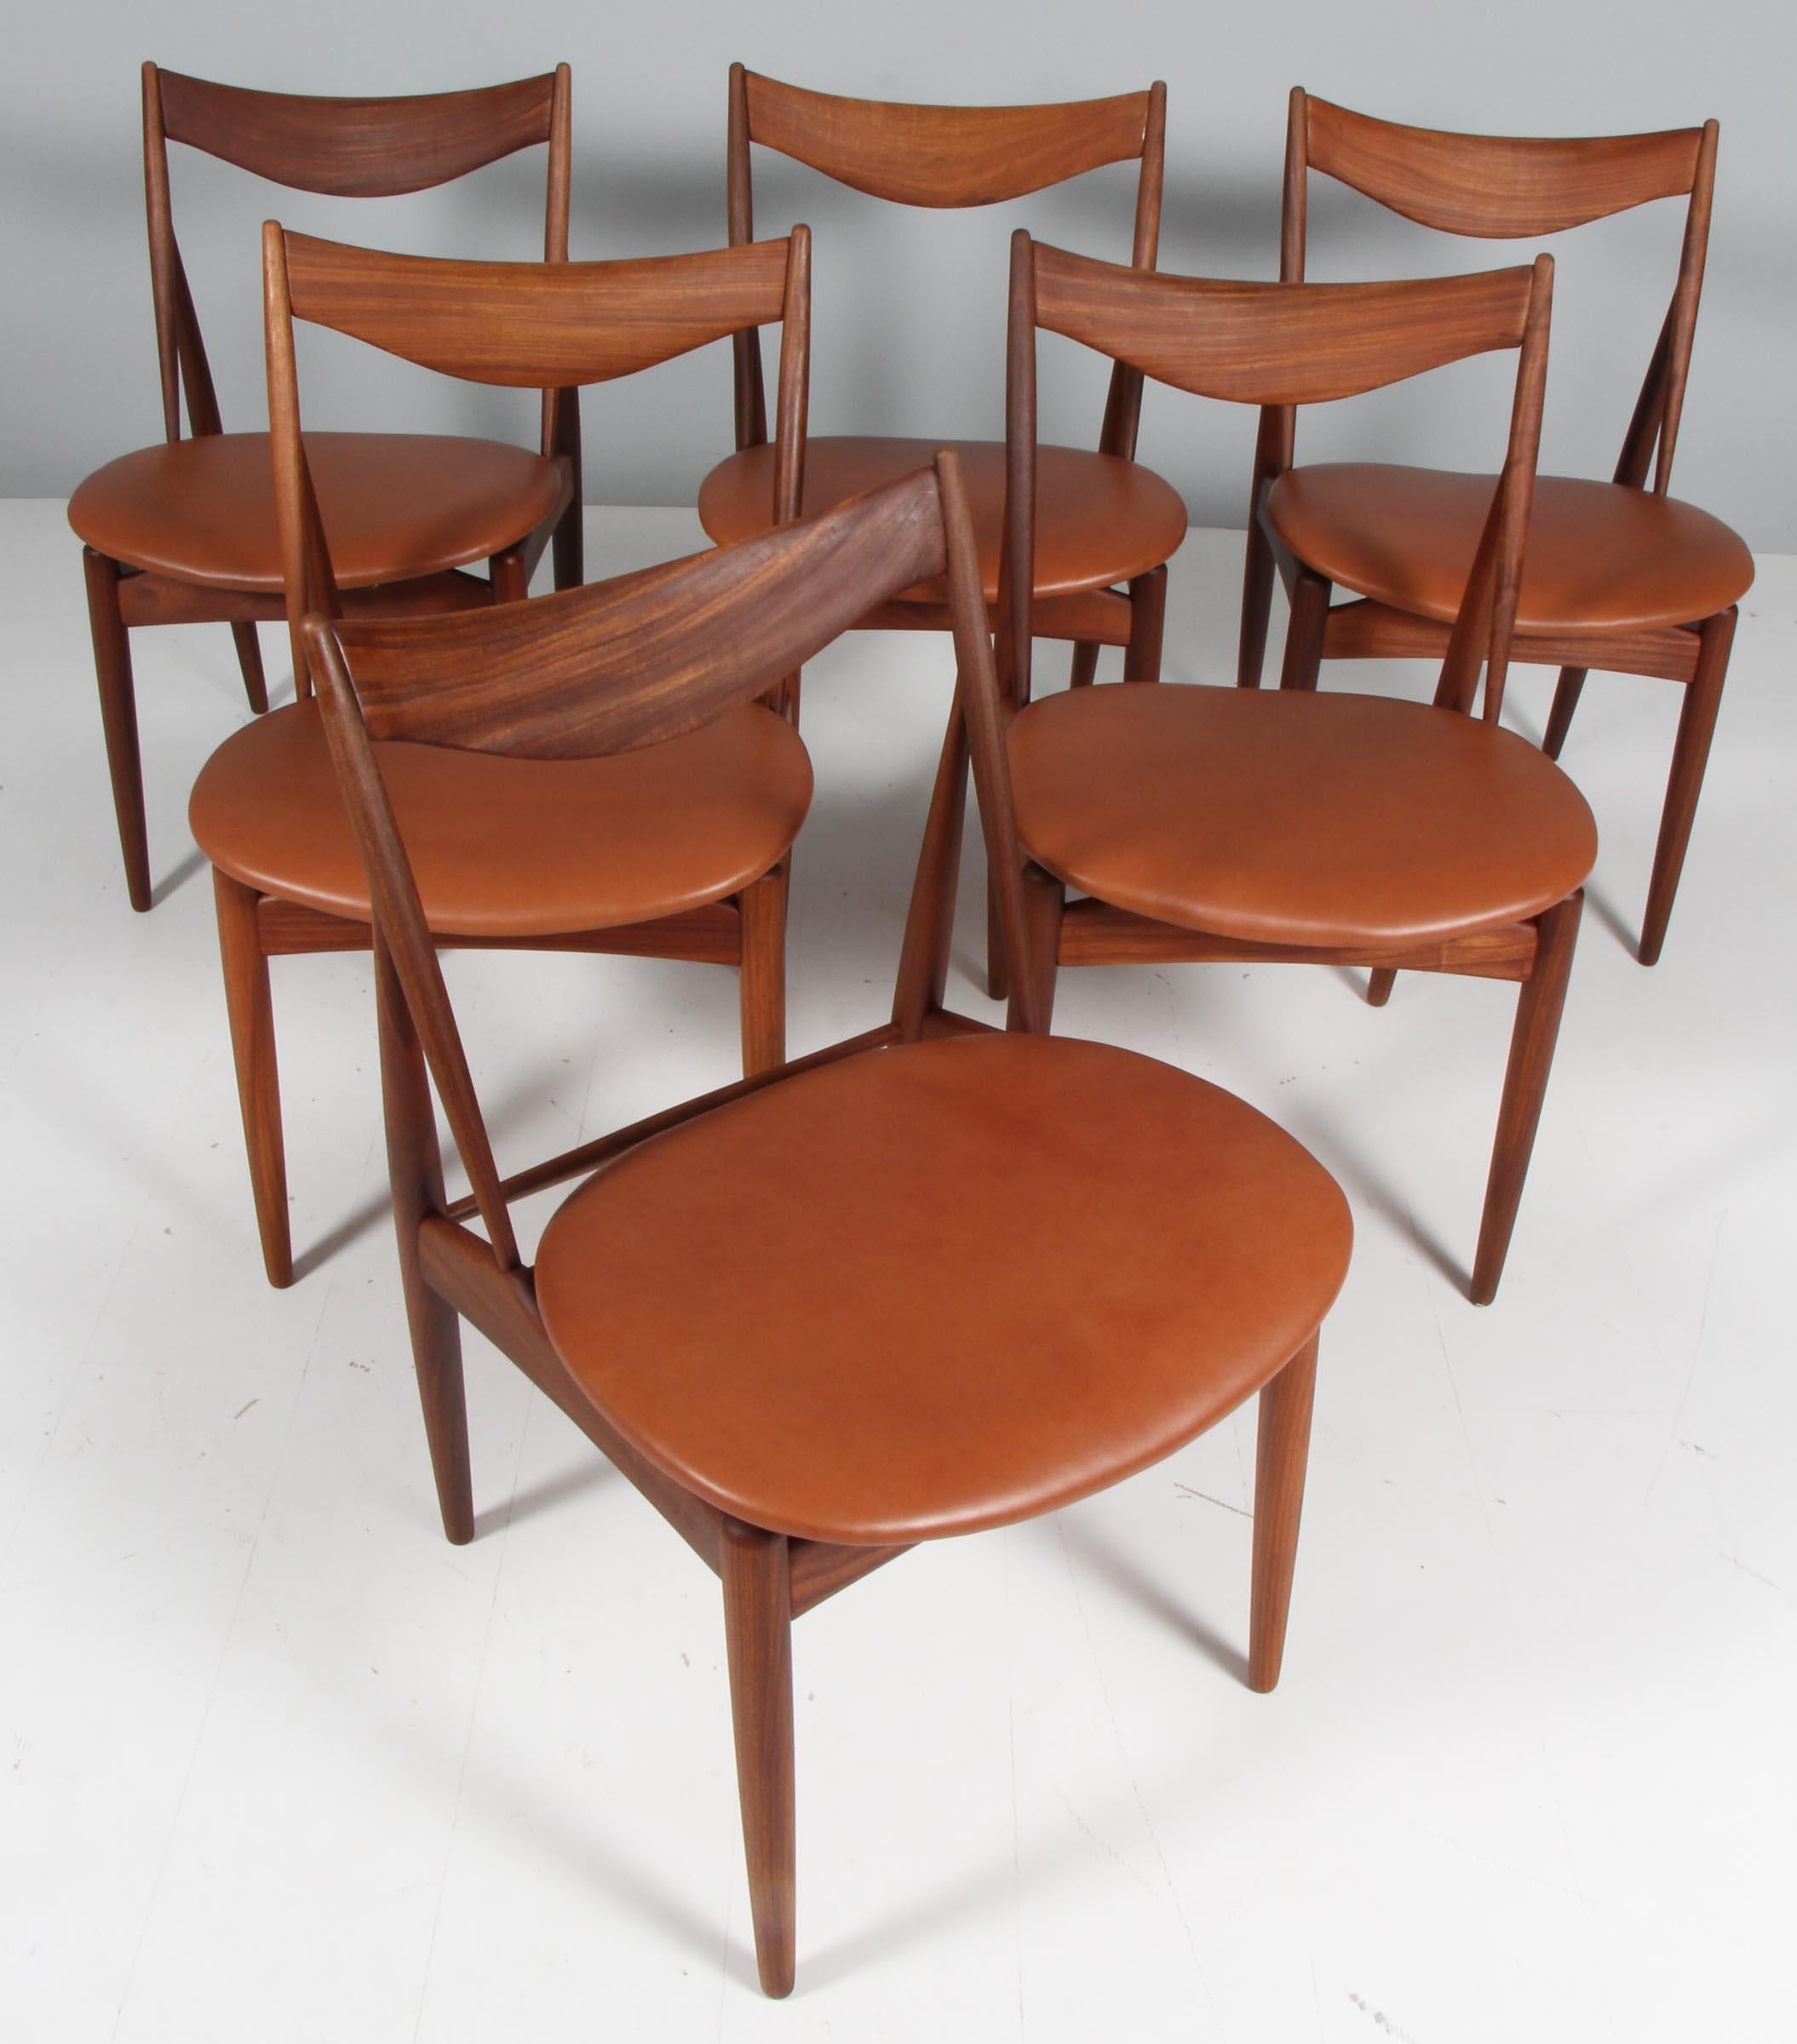 Henry Walter Klein six dining chairs in solid teak.

New upholstered with full grain aniline leather.

Made by Bramin, 1960s.